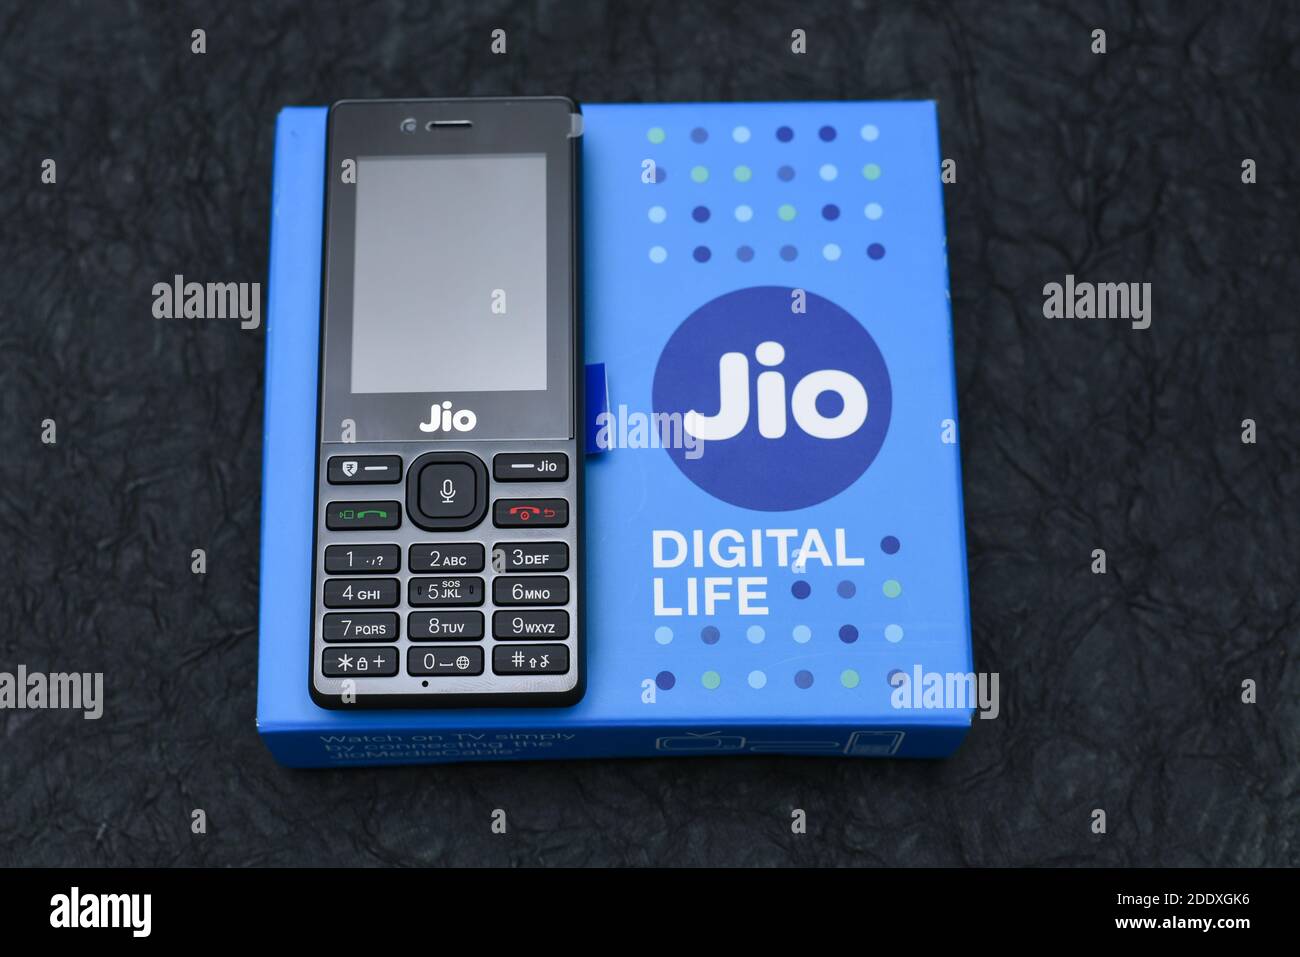 Reliance Jio mobile phones for old, elder people or senior citizens with number pad which is easy to use with big font. Stock Photo